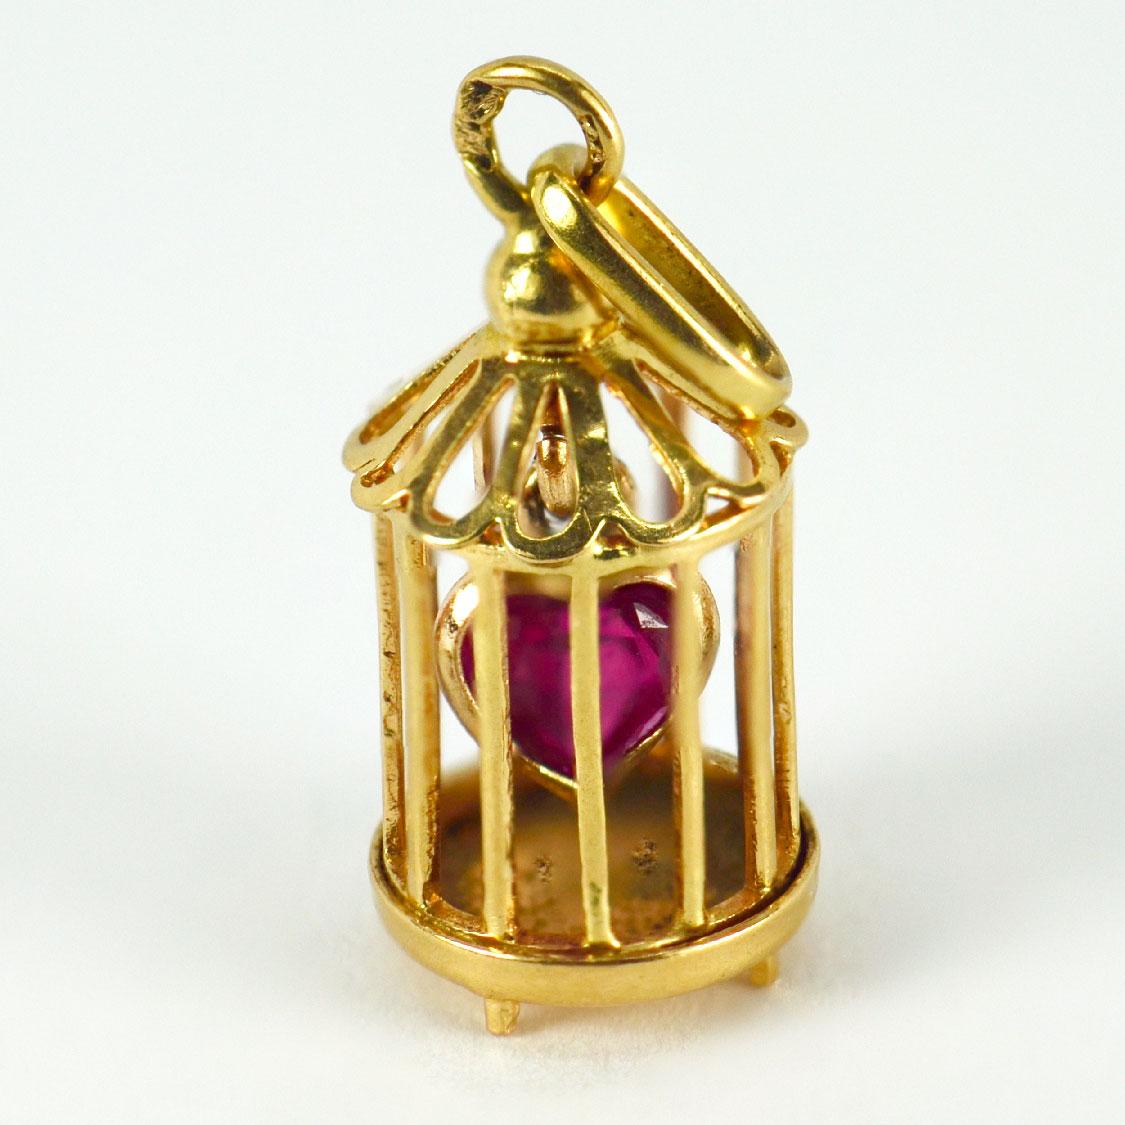 An 18 karat (18K) yellow gold charm pendant designed as a caged red synthetic ruby heart. Stamped with the eagle’s head for French manufacture and 18 karat gold.

Dimensions: 2 x 0.85 x 0.85 cm (not including jump ring)
Weight: 1.53 gram
